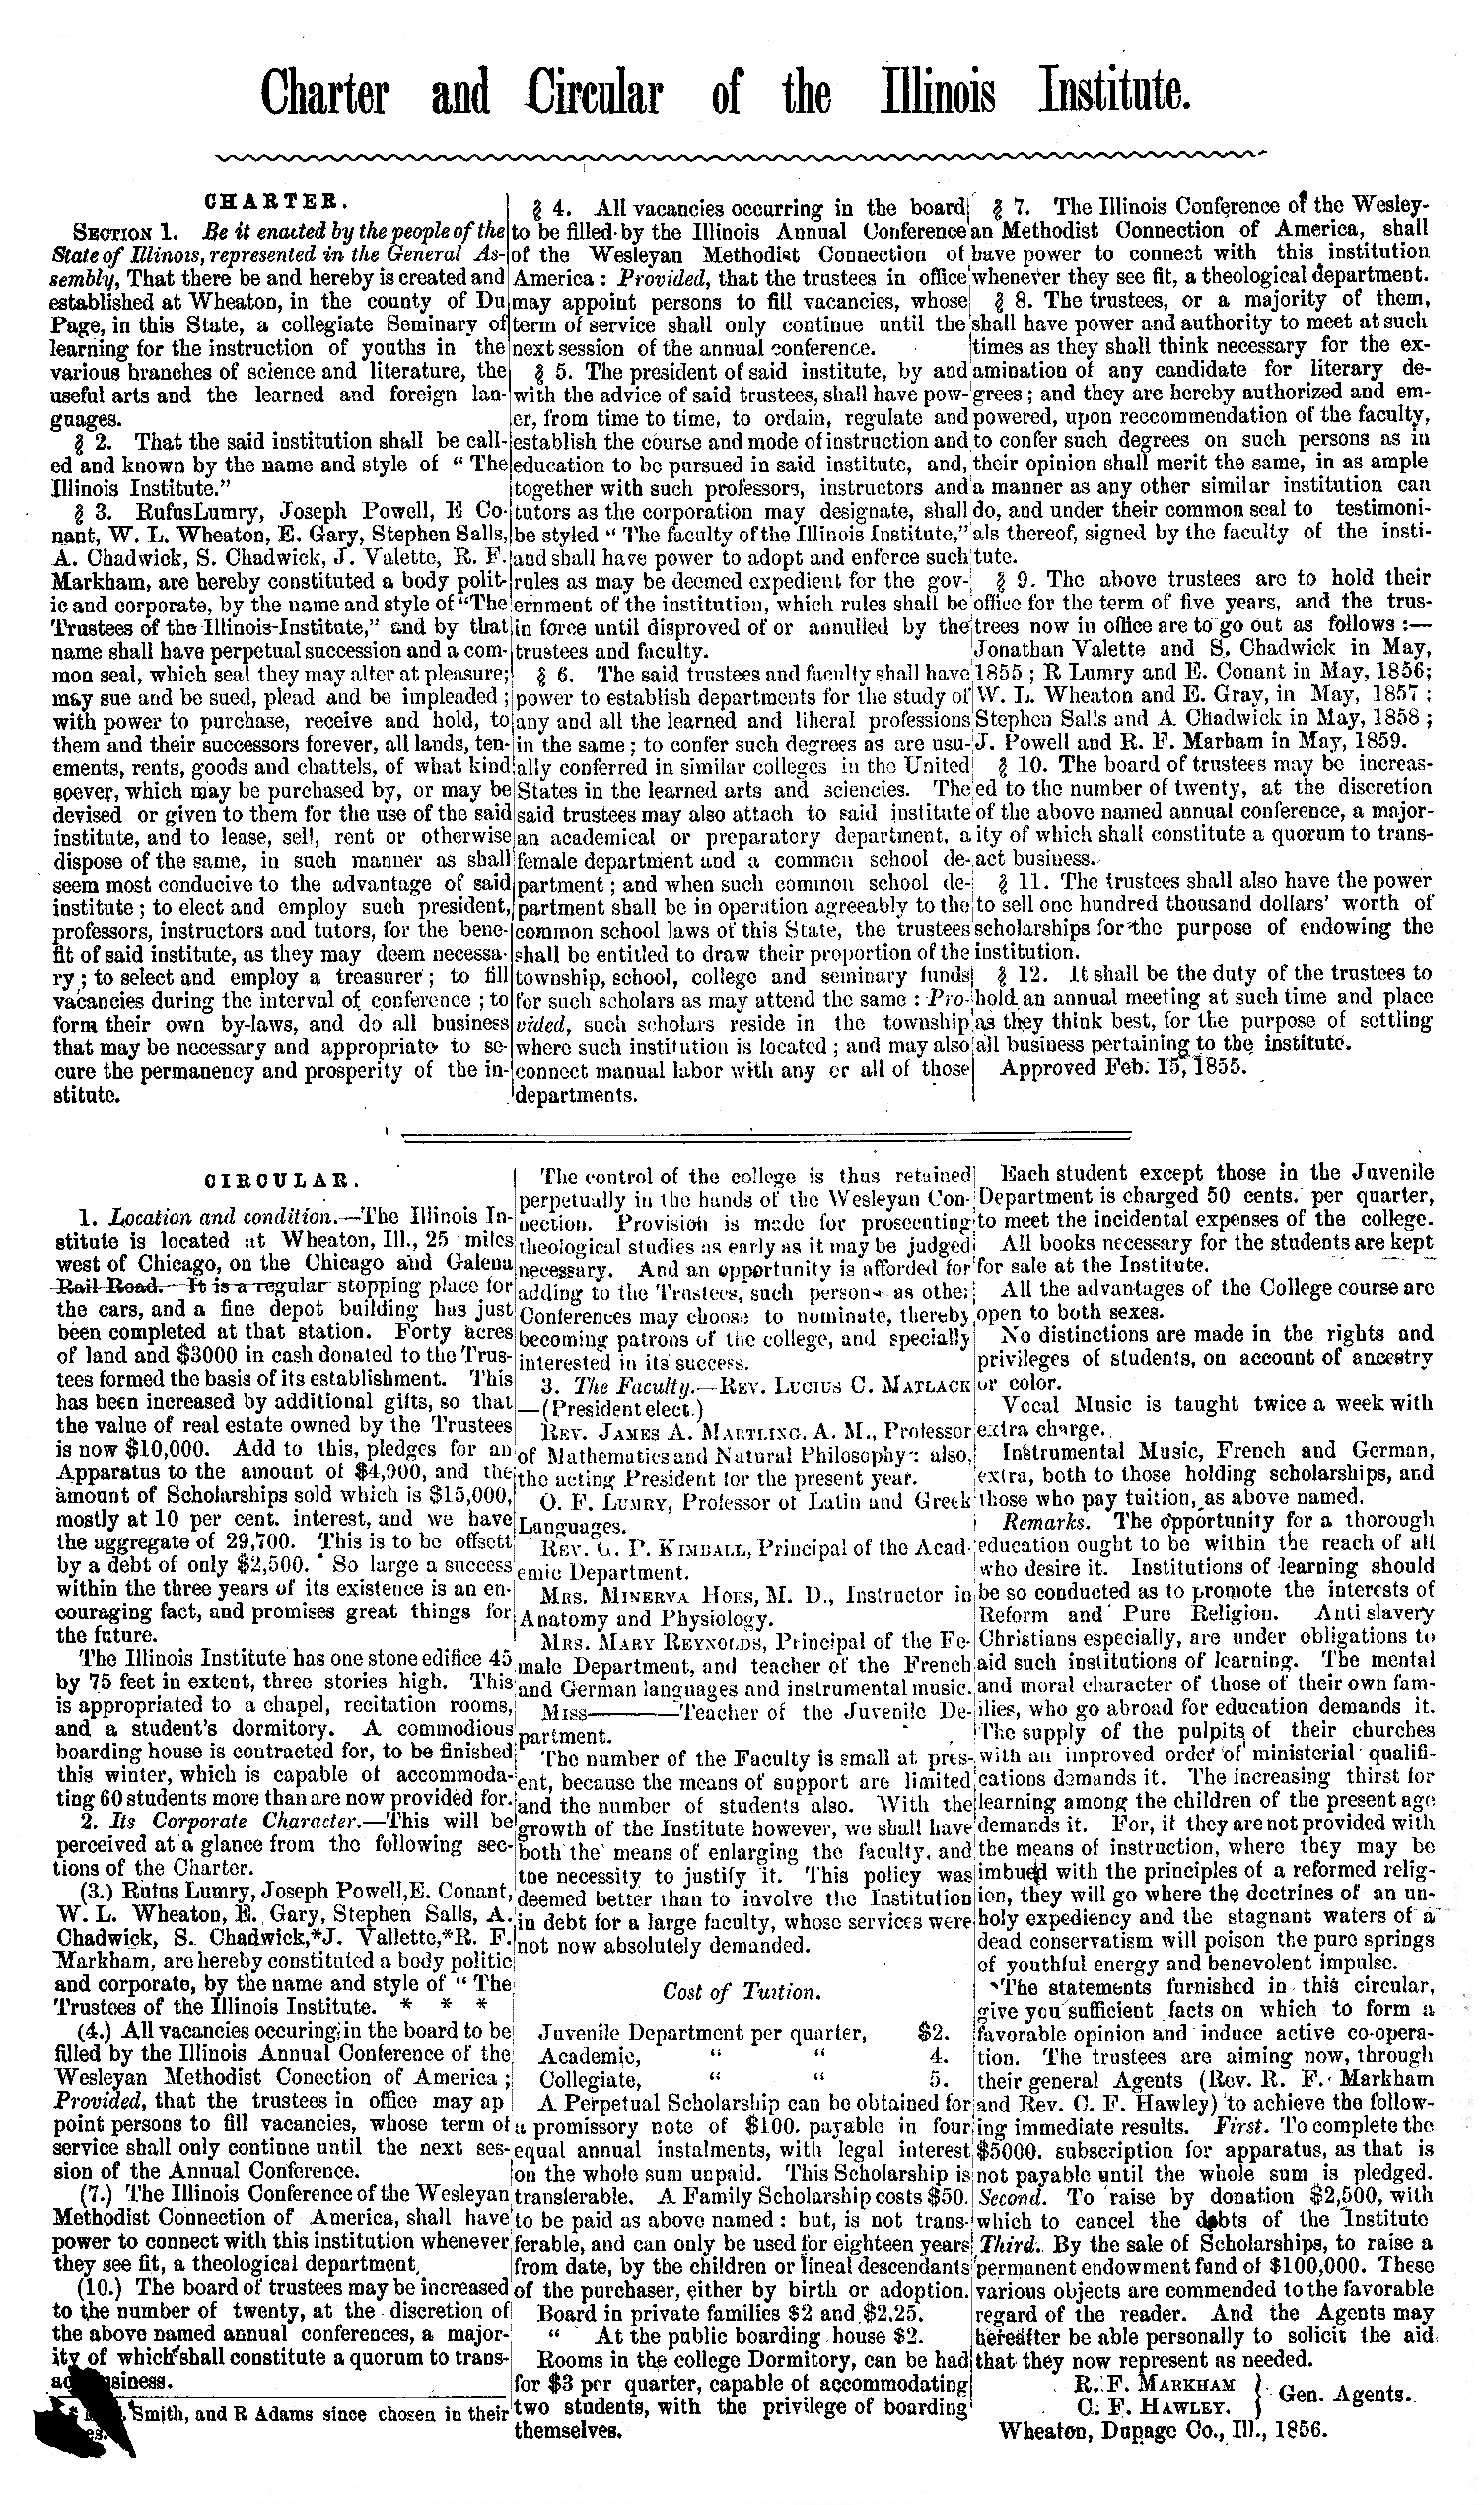 Illinois-Institute-charter-4.png